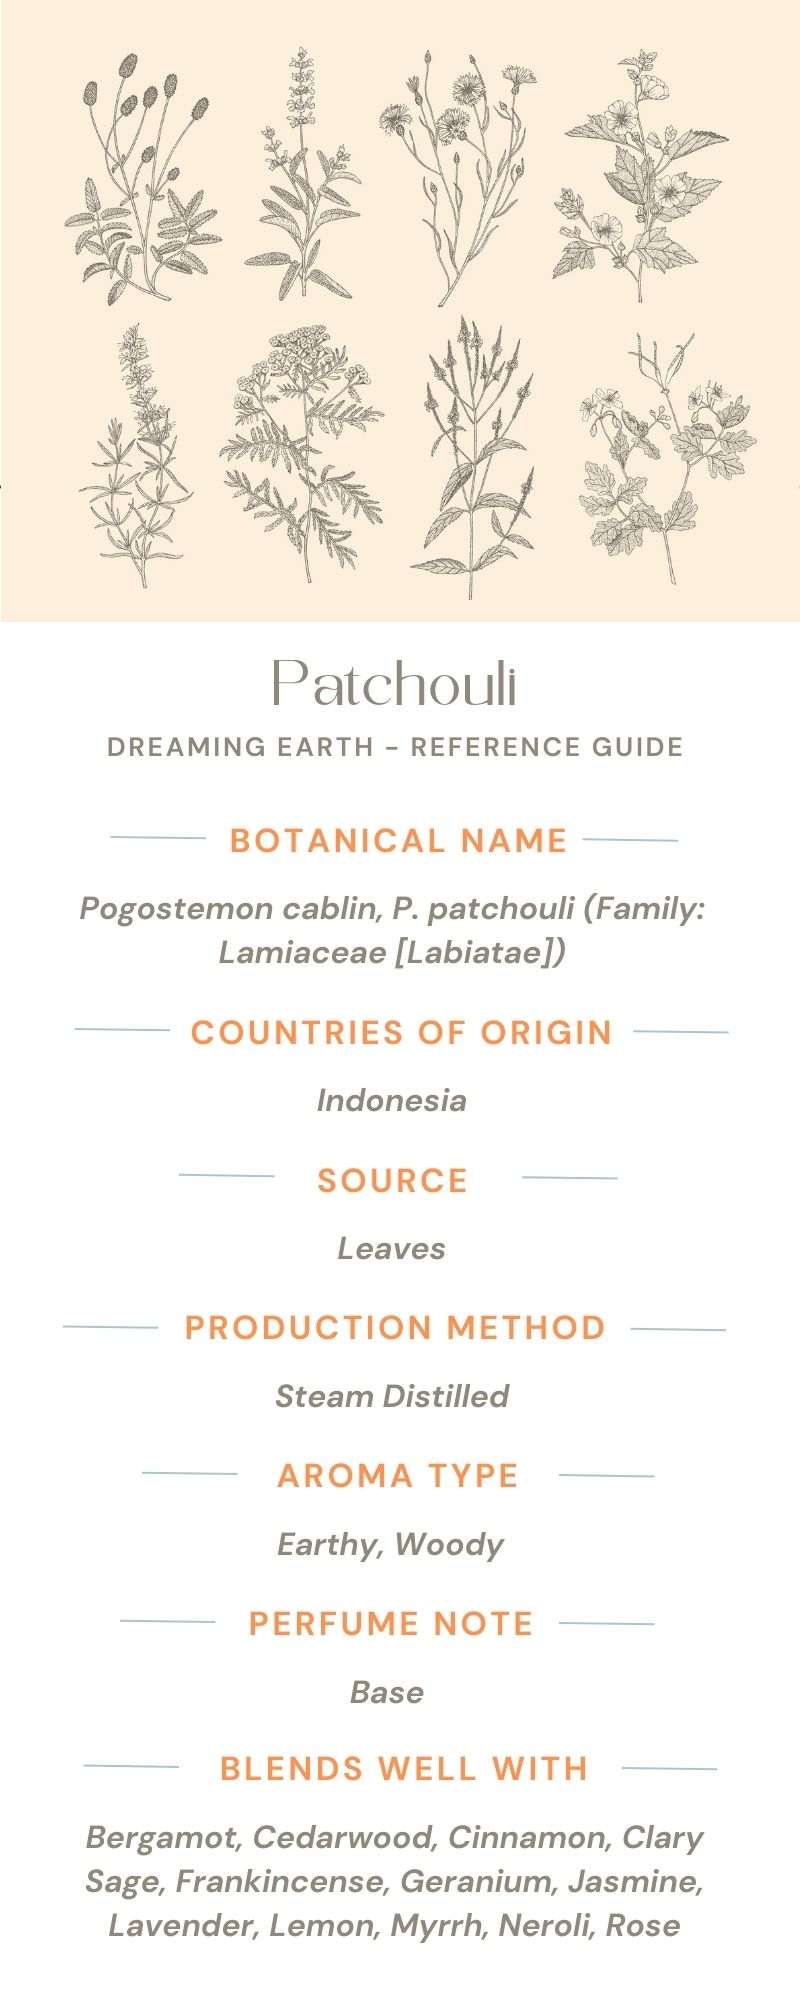 Load image into Gallery viewer, Patchouli Essential Oil - Dreaming Earth Inc
